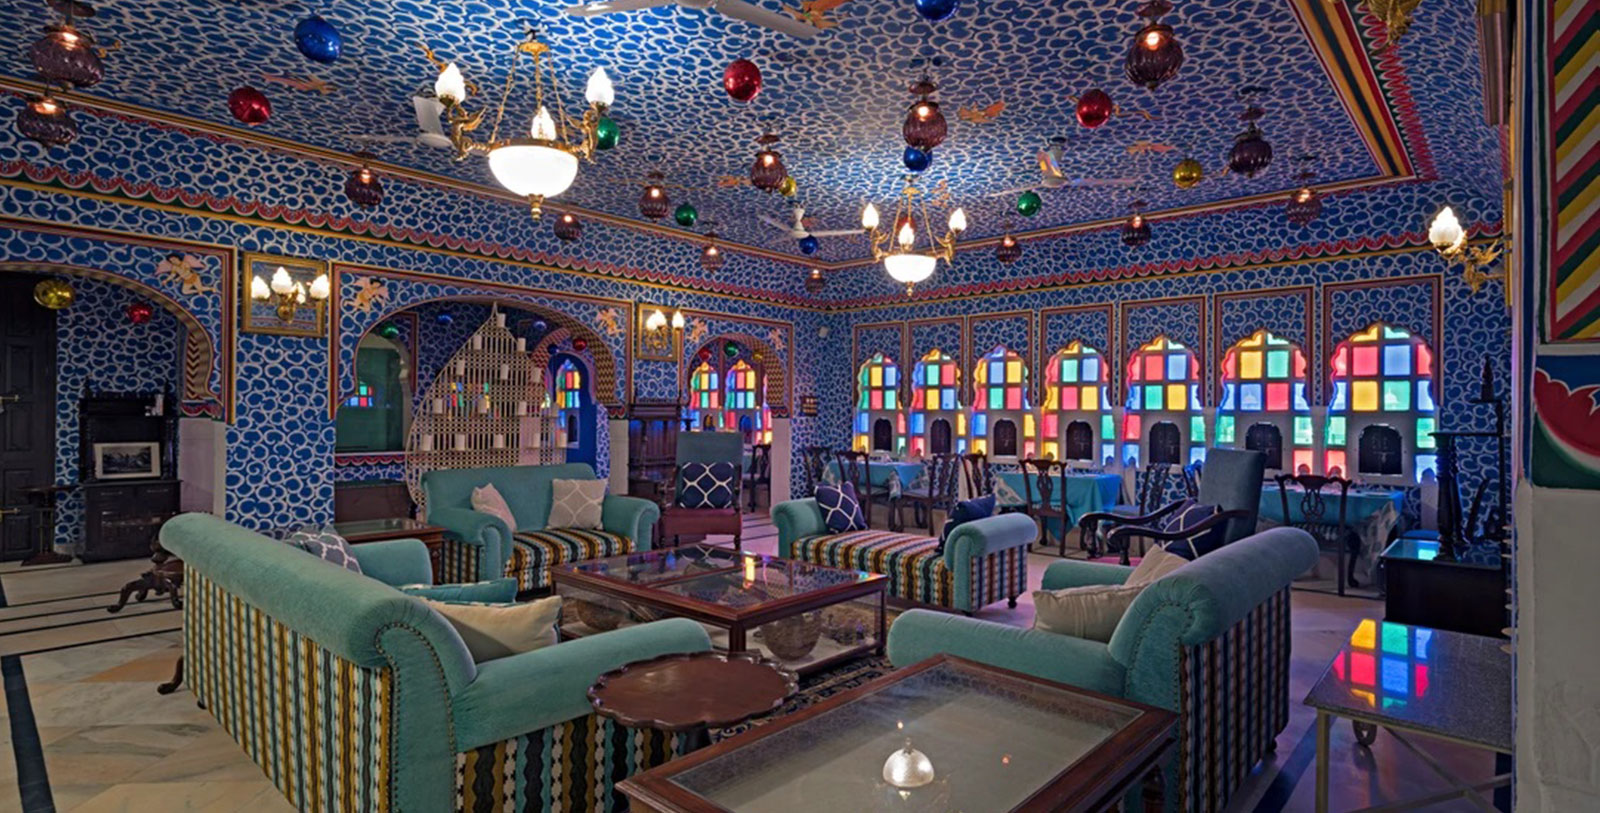 Taste the rich flavors of Rajasthani cuisine during one of Alsisar Mahal's live cooking demonstrations.